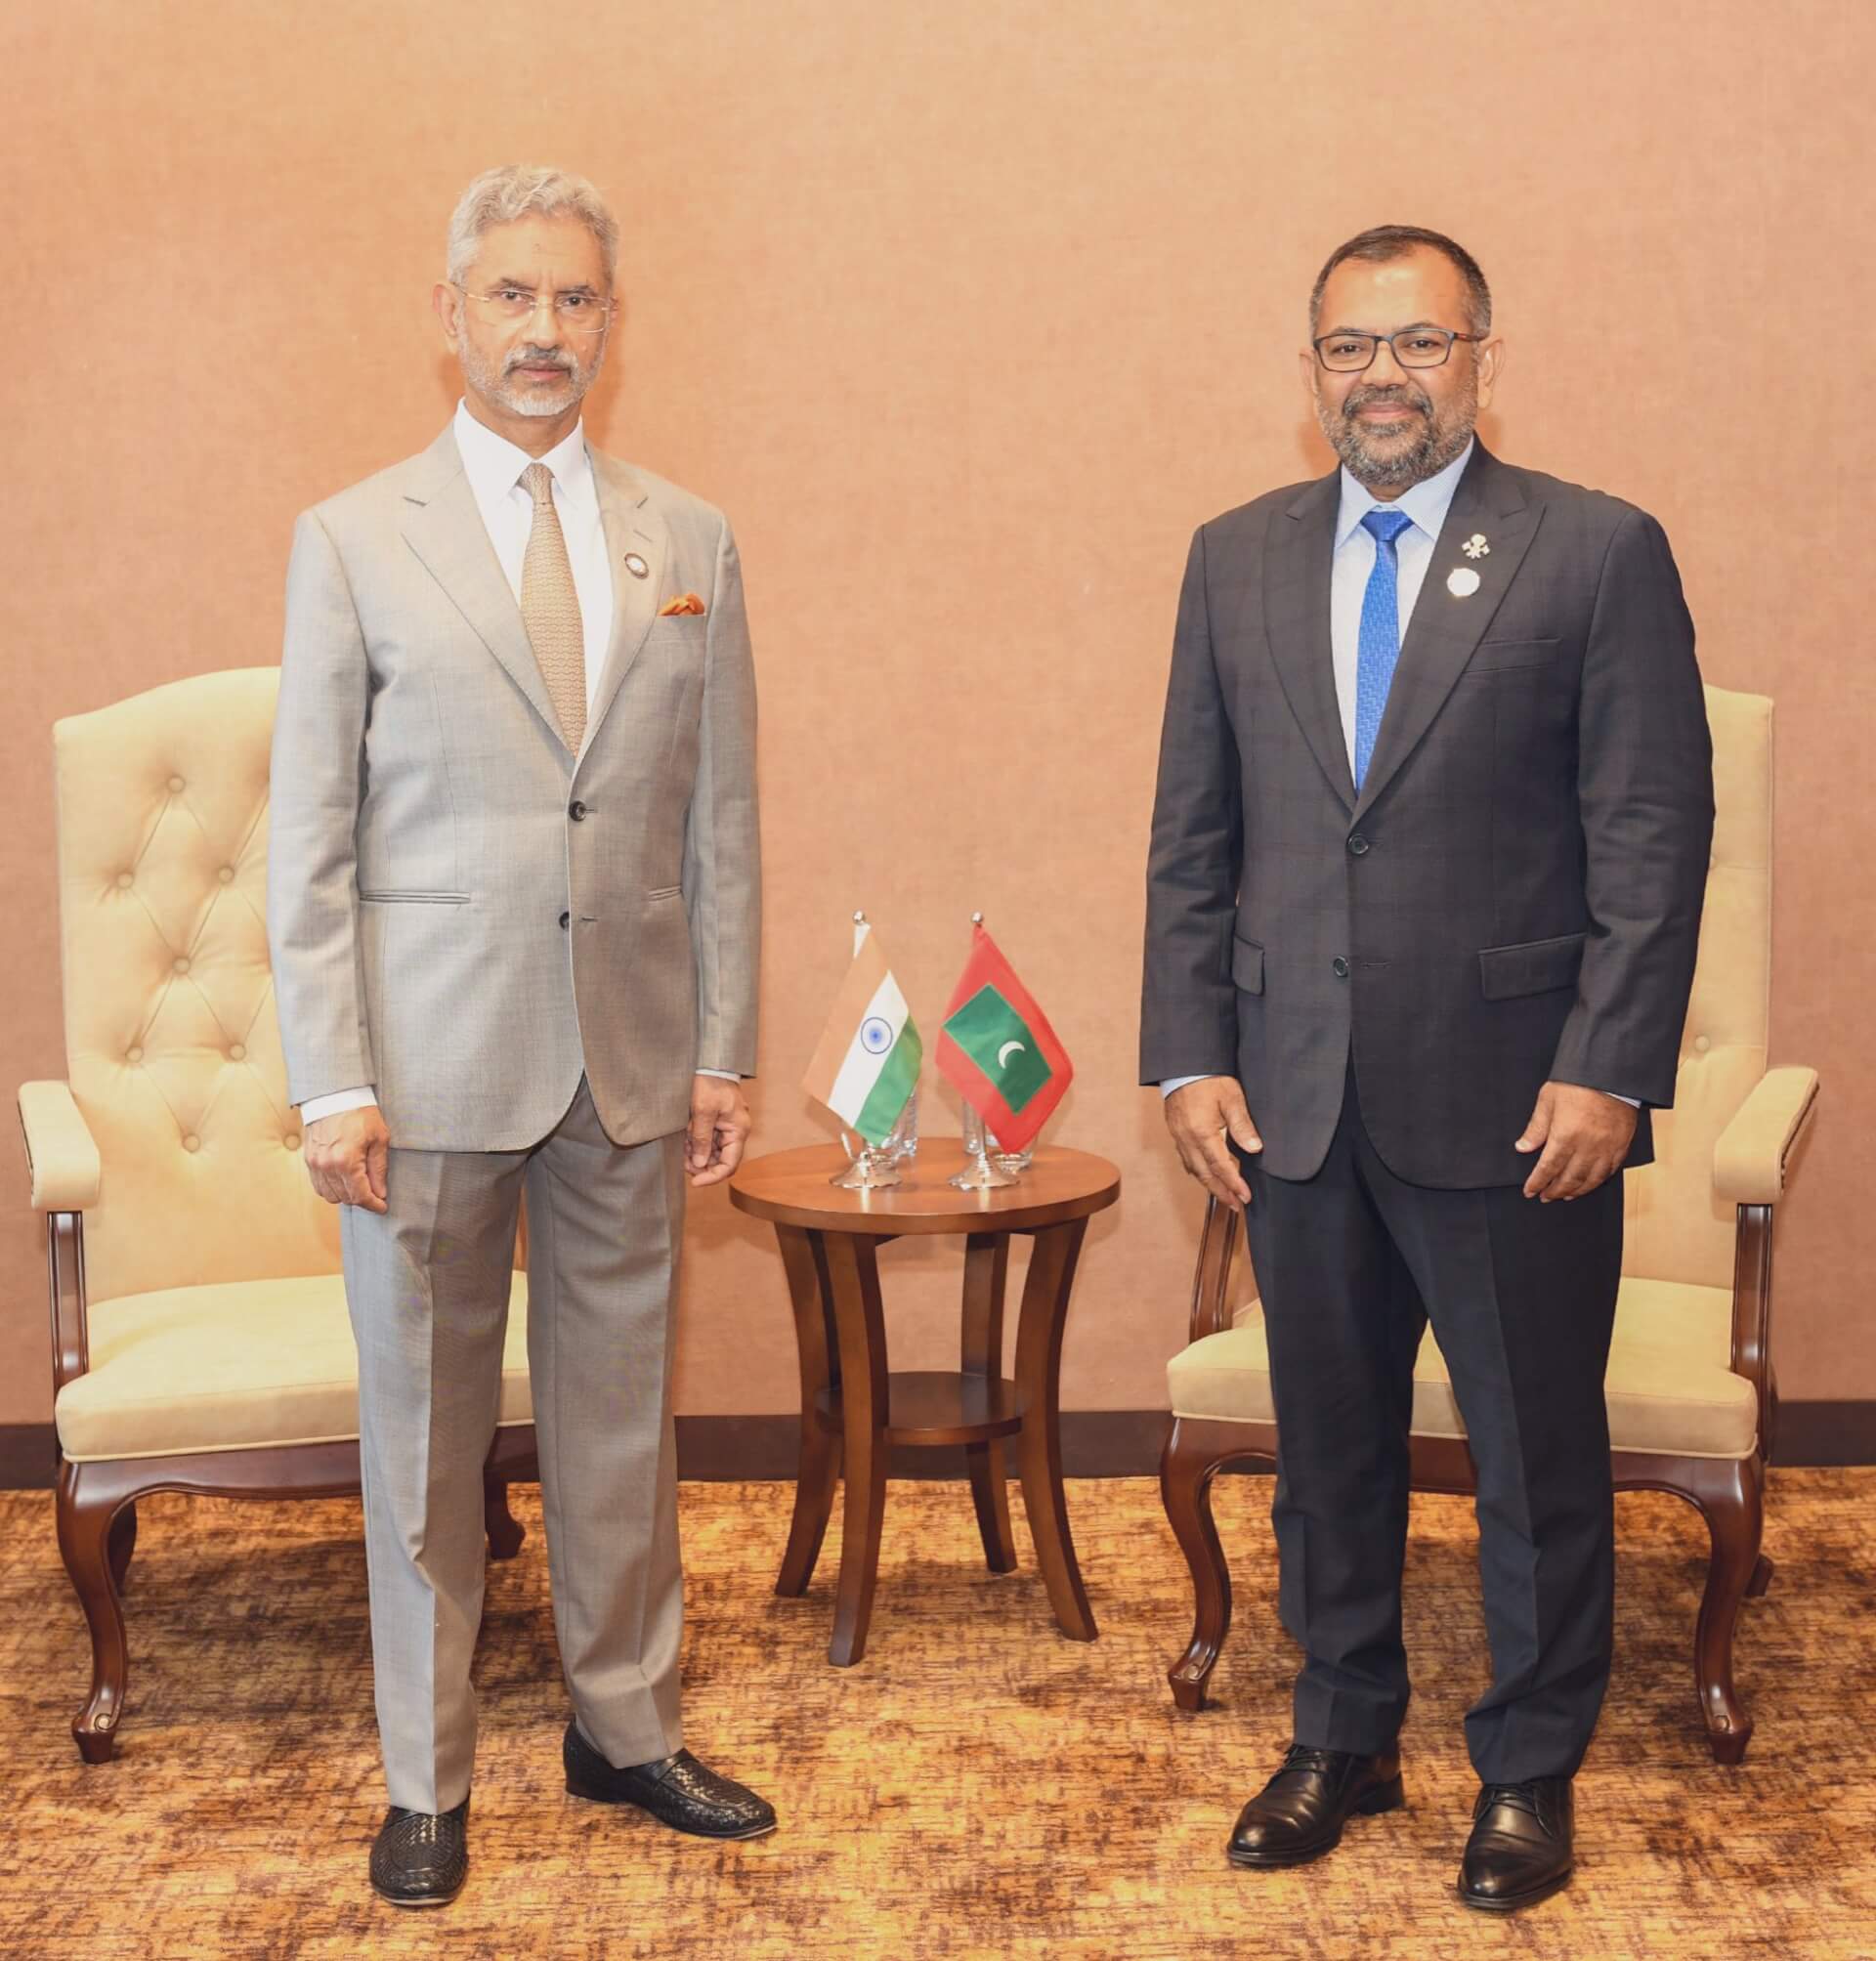 Maldivian FM Renews Call for Indian Troop Withdrawal in Meeting with EAM Jaishankar